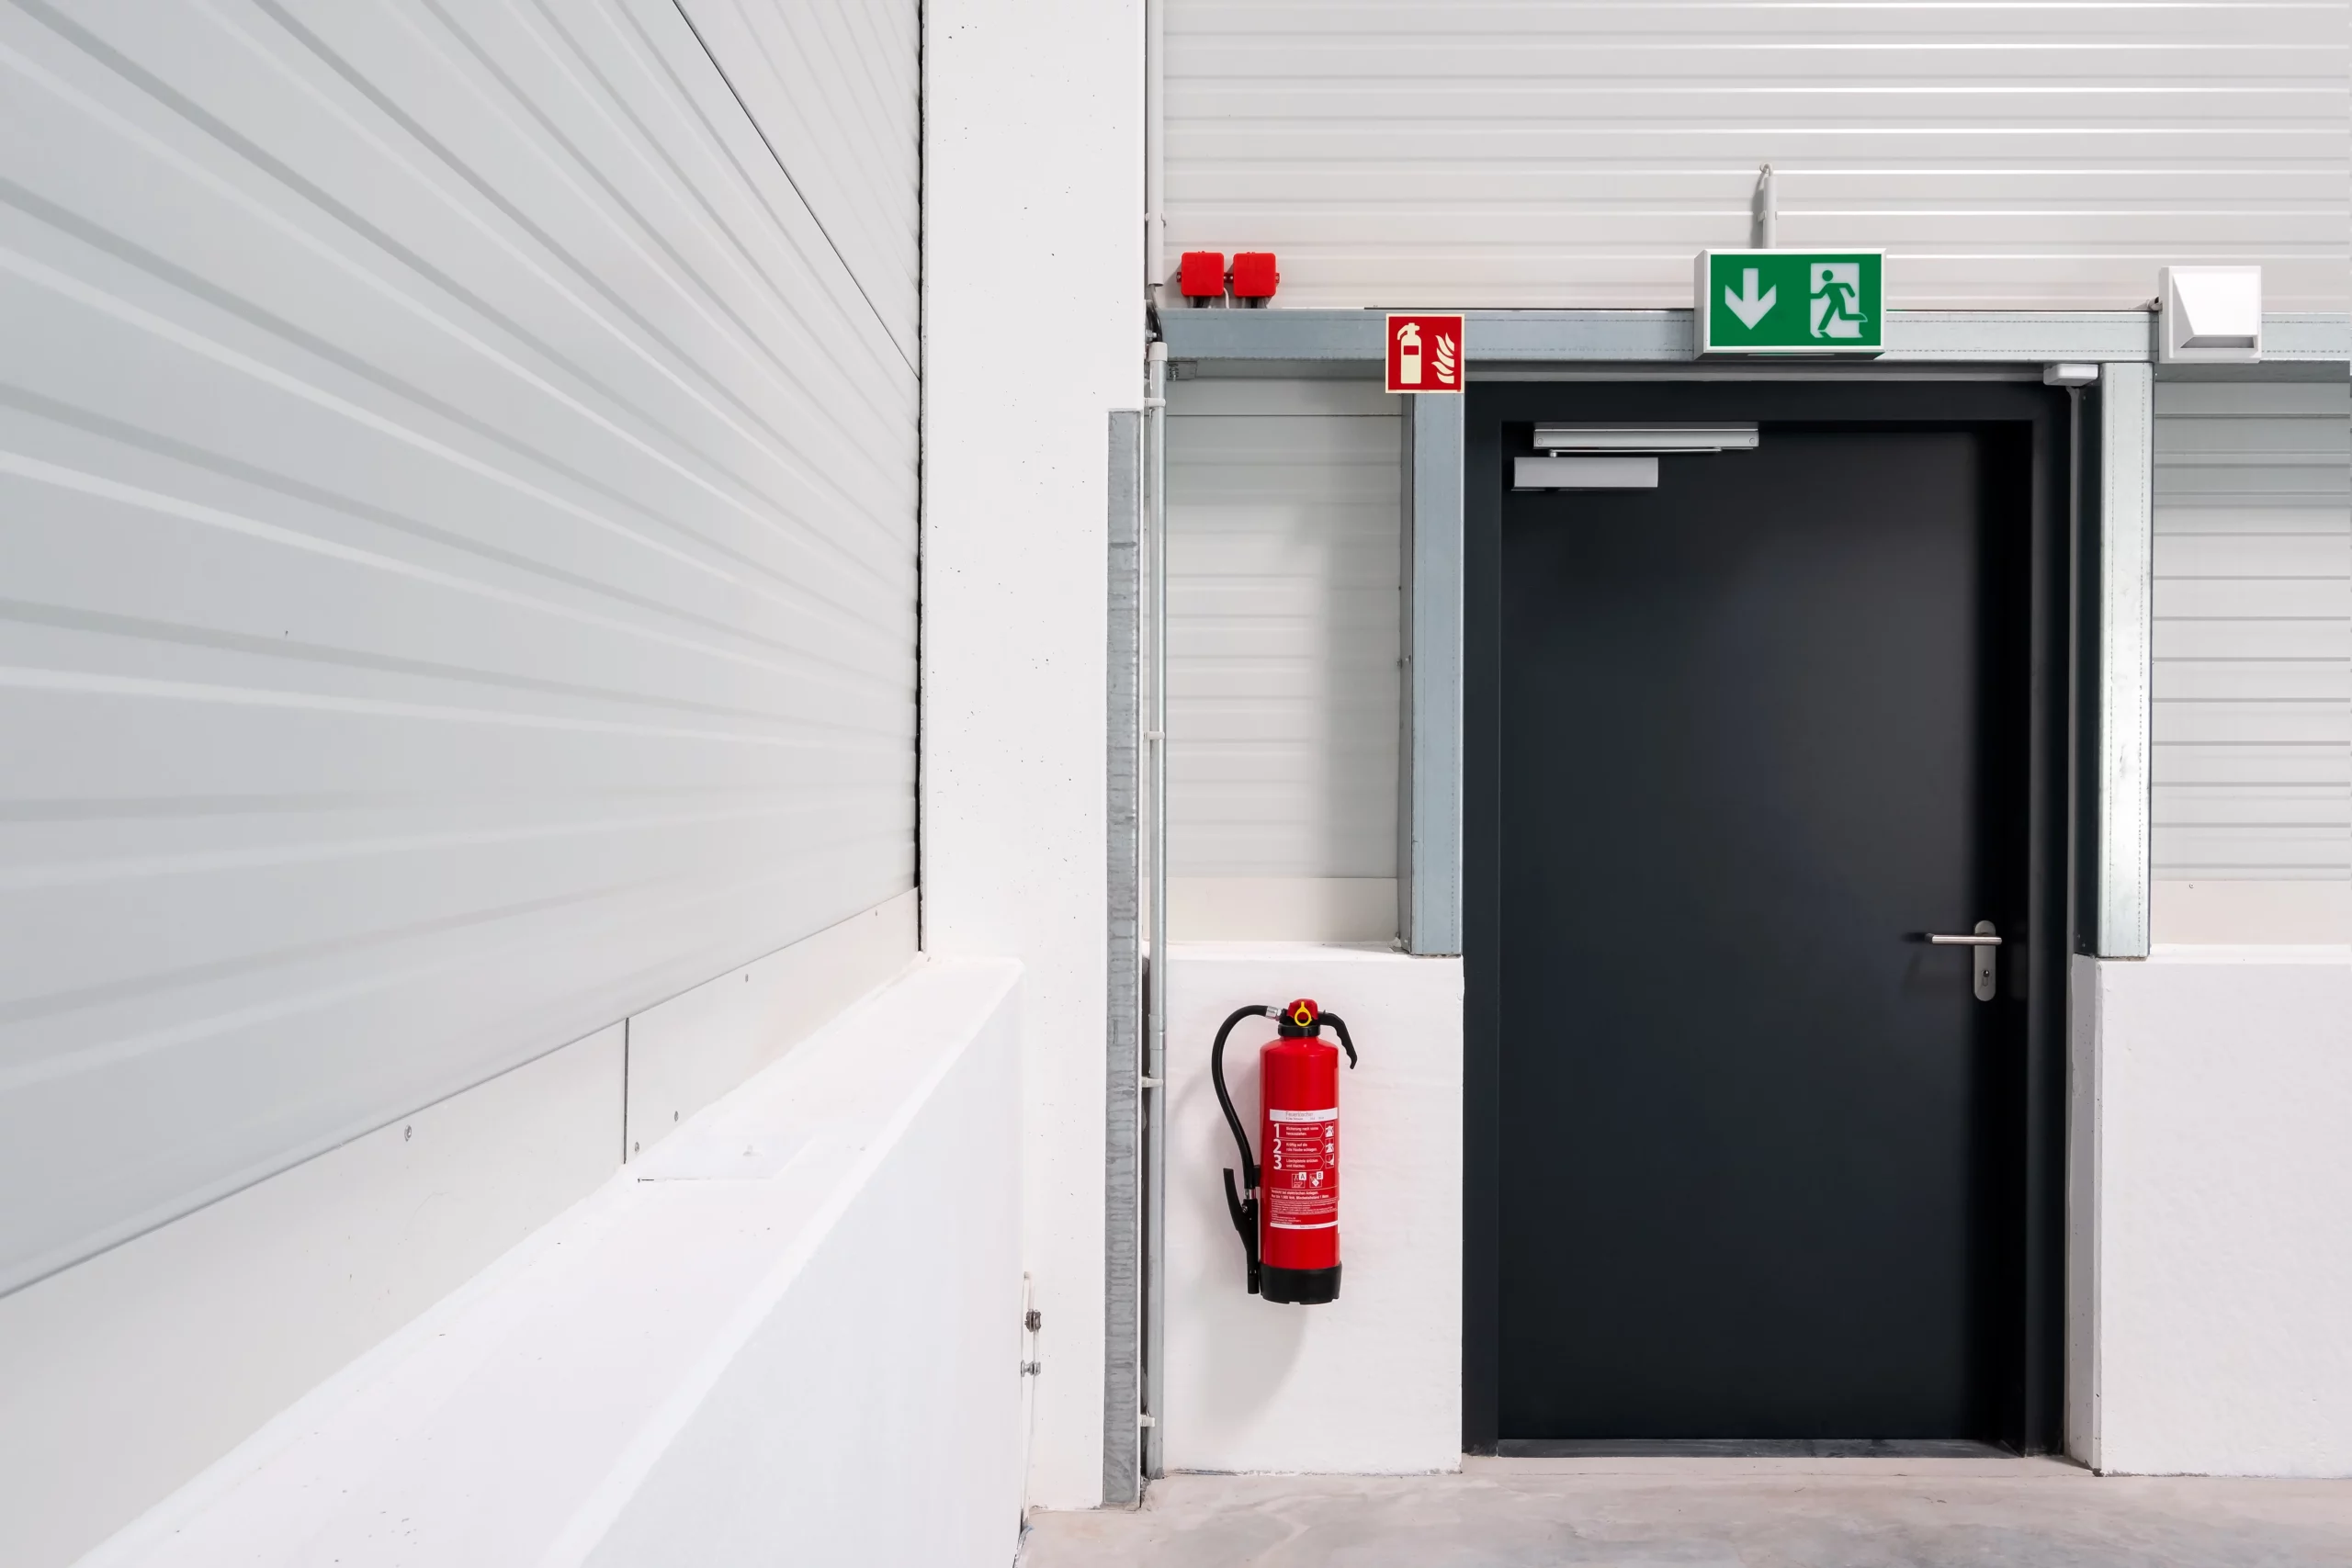 A fire door outside, with a fire exit sign , and extinguisher.